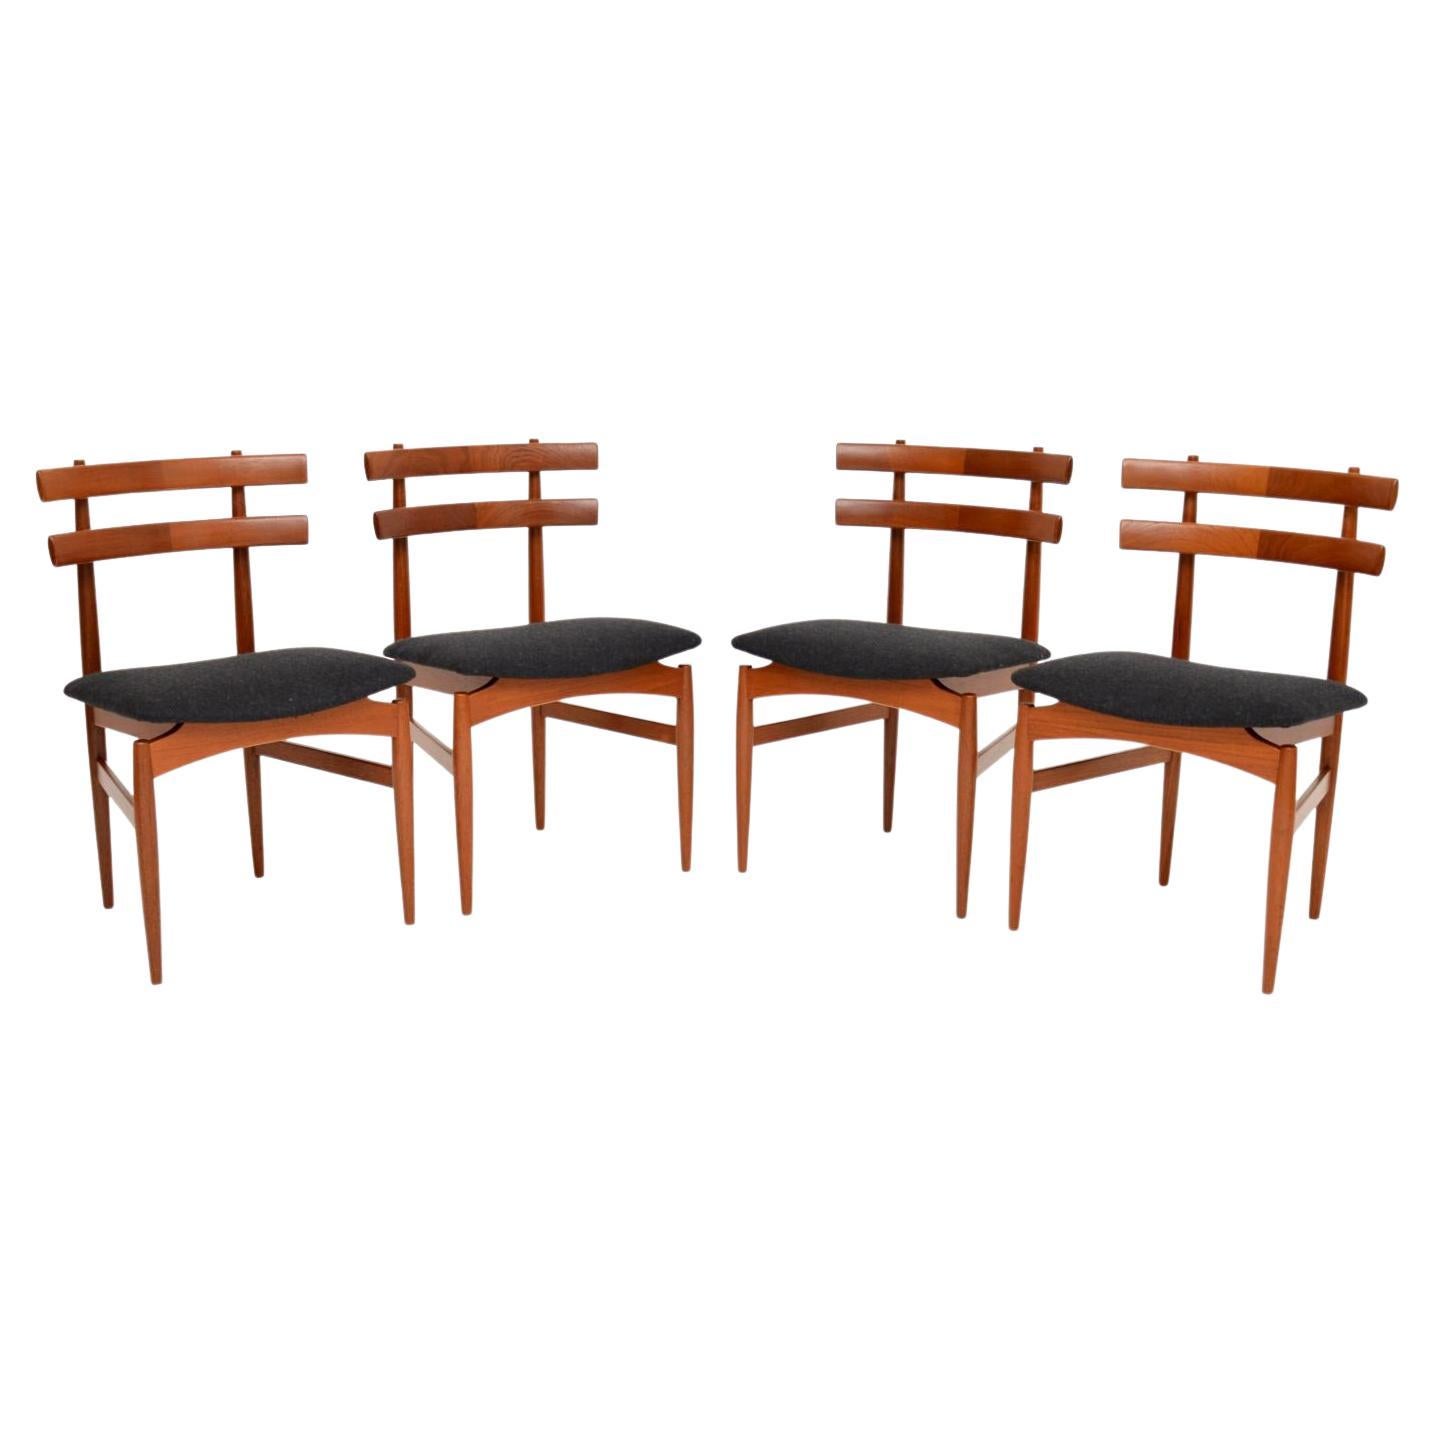 Set of 4 Danish Vintage Teak Dining Chairs by Poul Hundevad For Sale